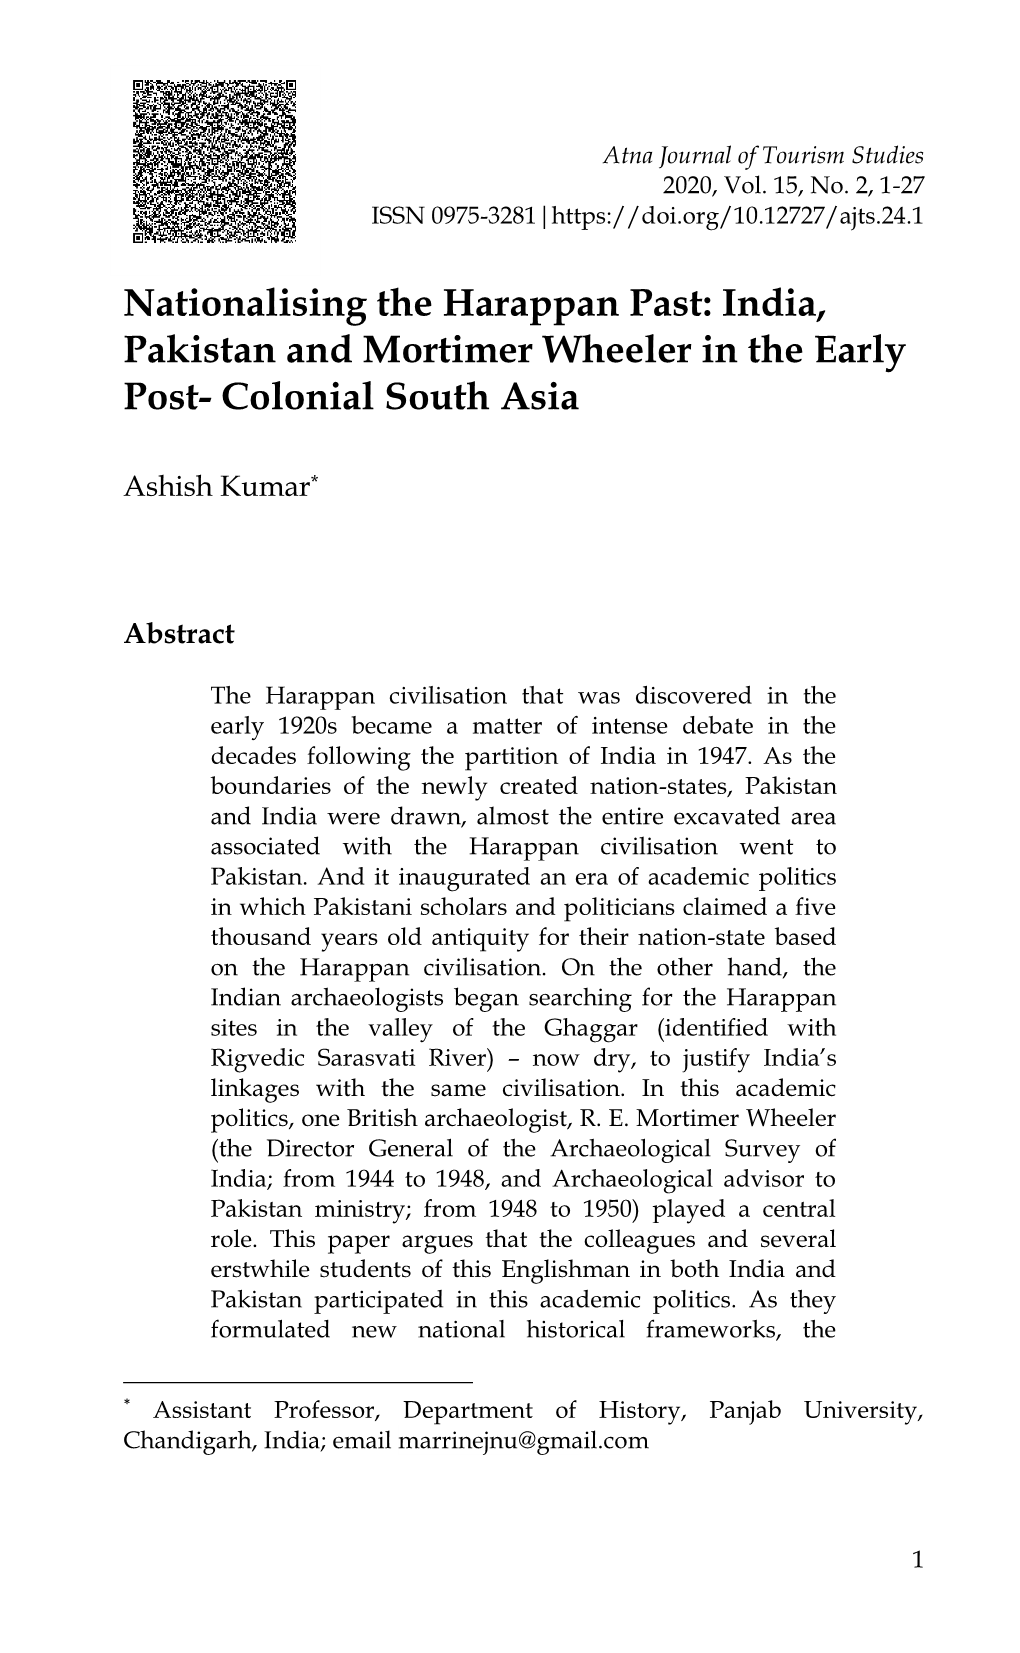 India, Pakistan and Mortimer Wheeler in the Early Post- Colonial South Asia